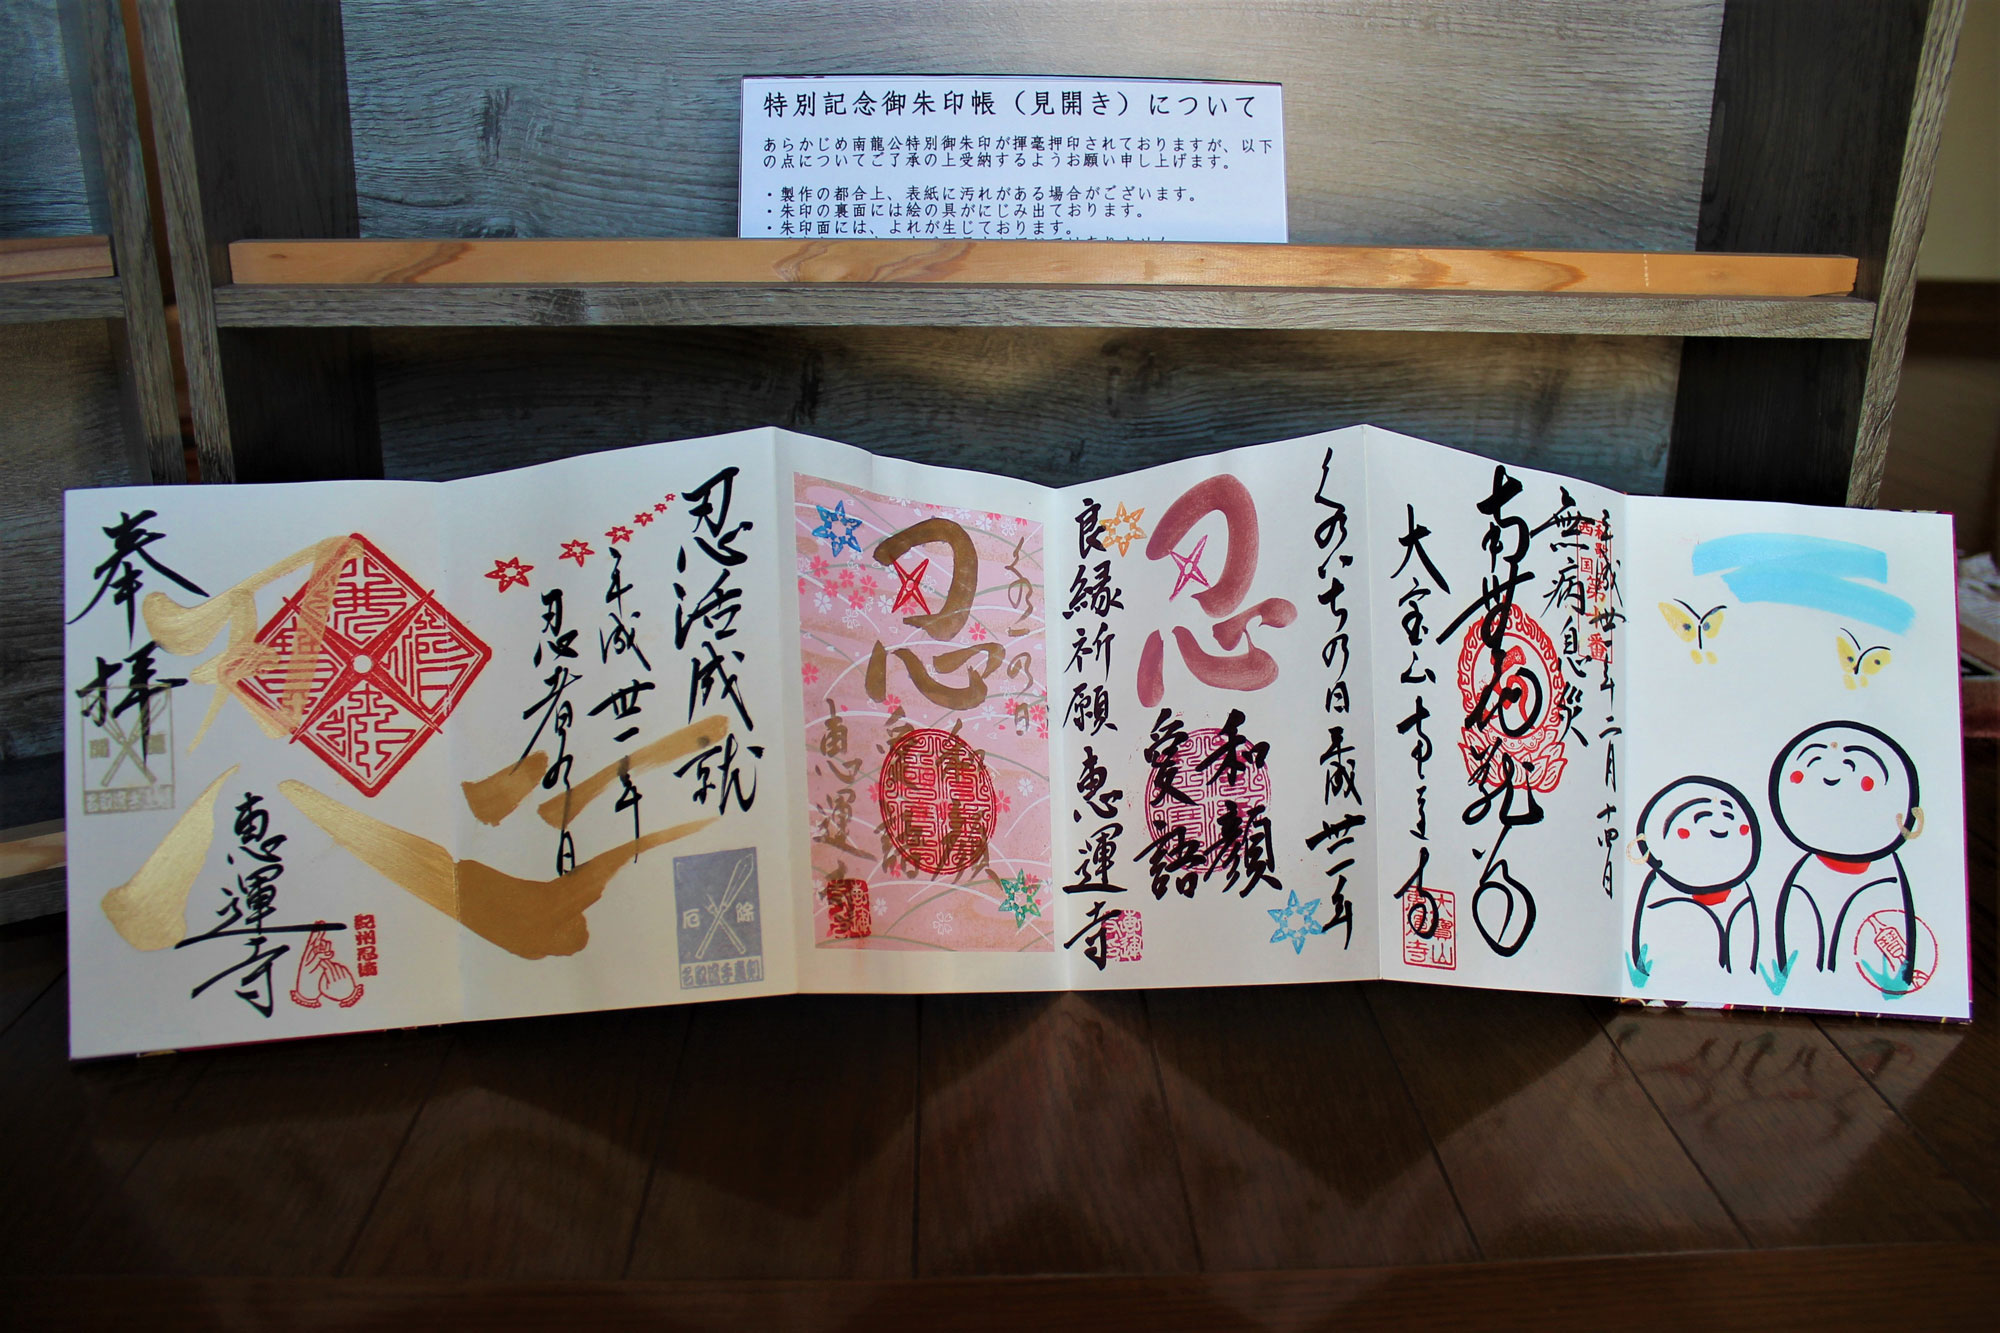 There are various types of limited Goshuin ( red stamps) depending on when you visit.  (For this type of the Goshuin (red stamp), please check the Goshuin(red stamp) schedule before visiting.)の写真